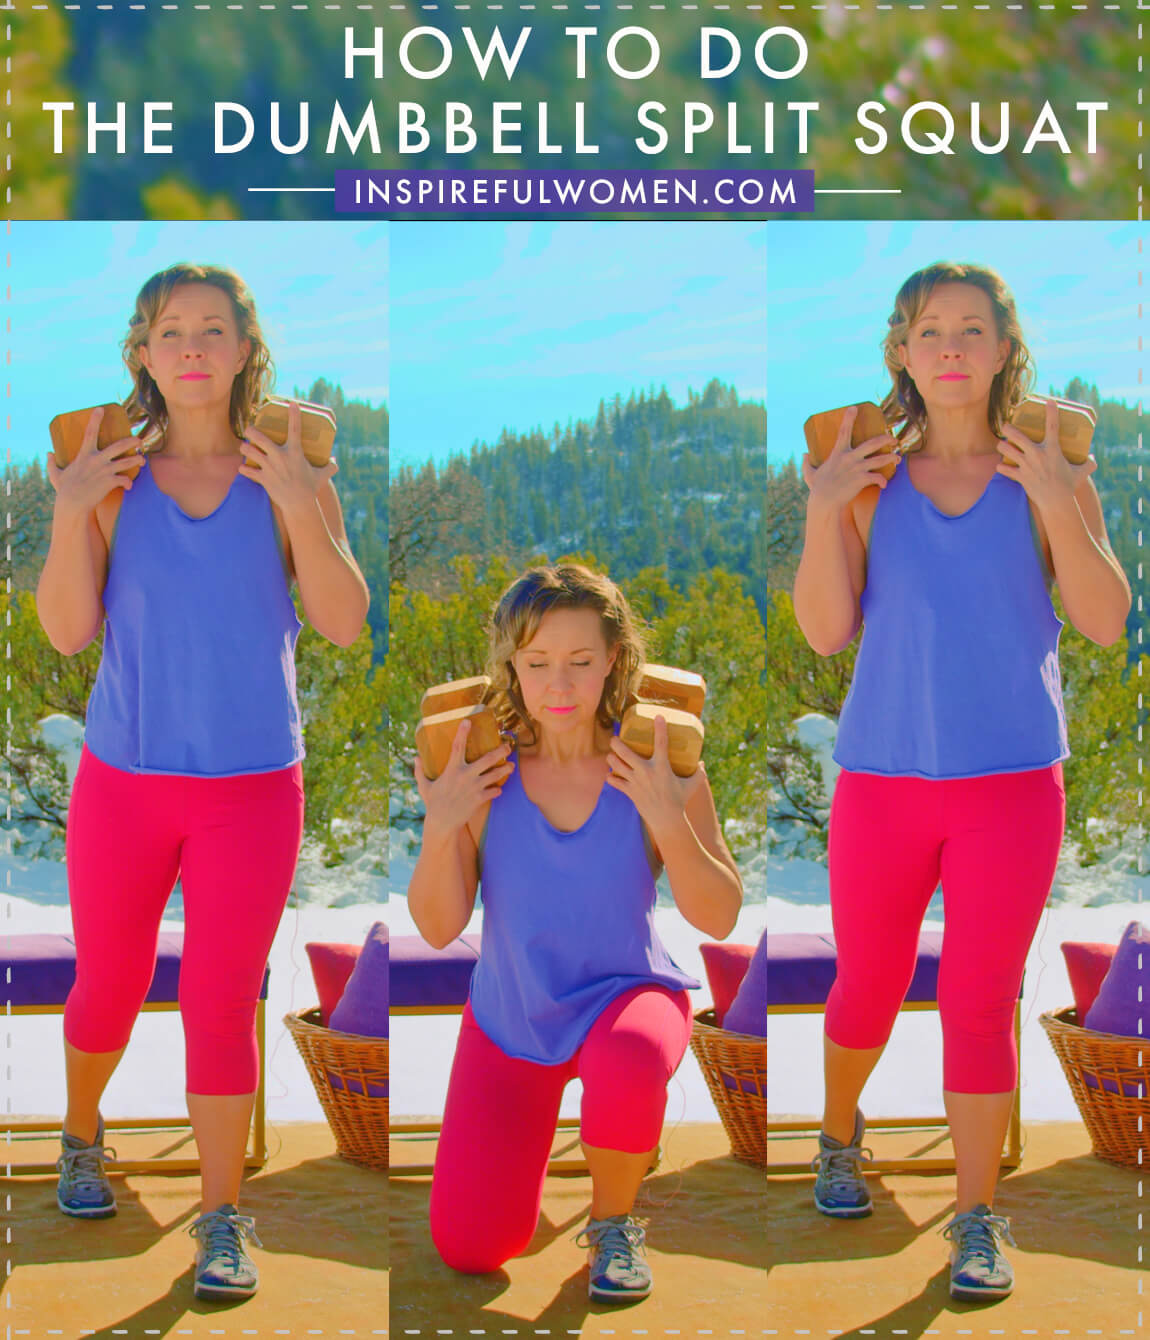 how-to-dumbbell-split-squat-quads-glutes-lower-body-exercise-proper-form